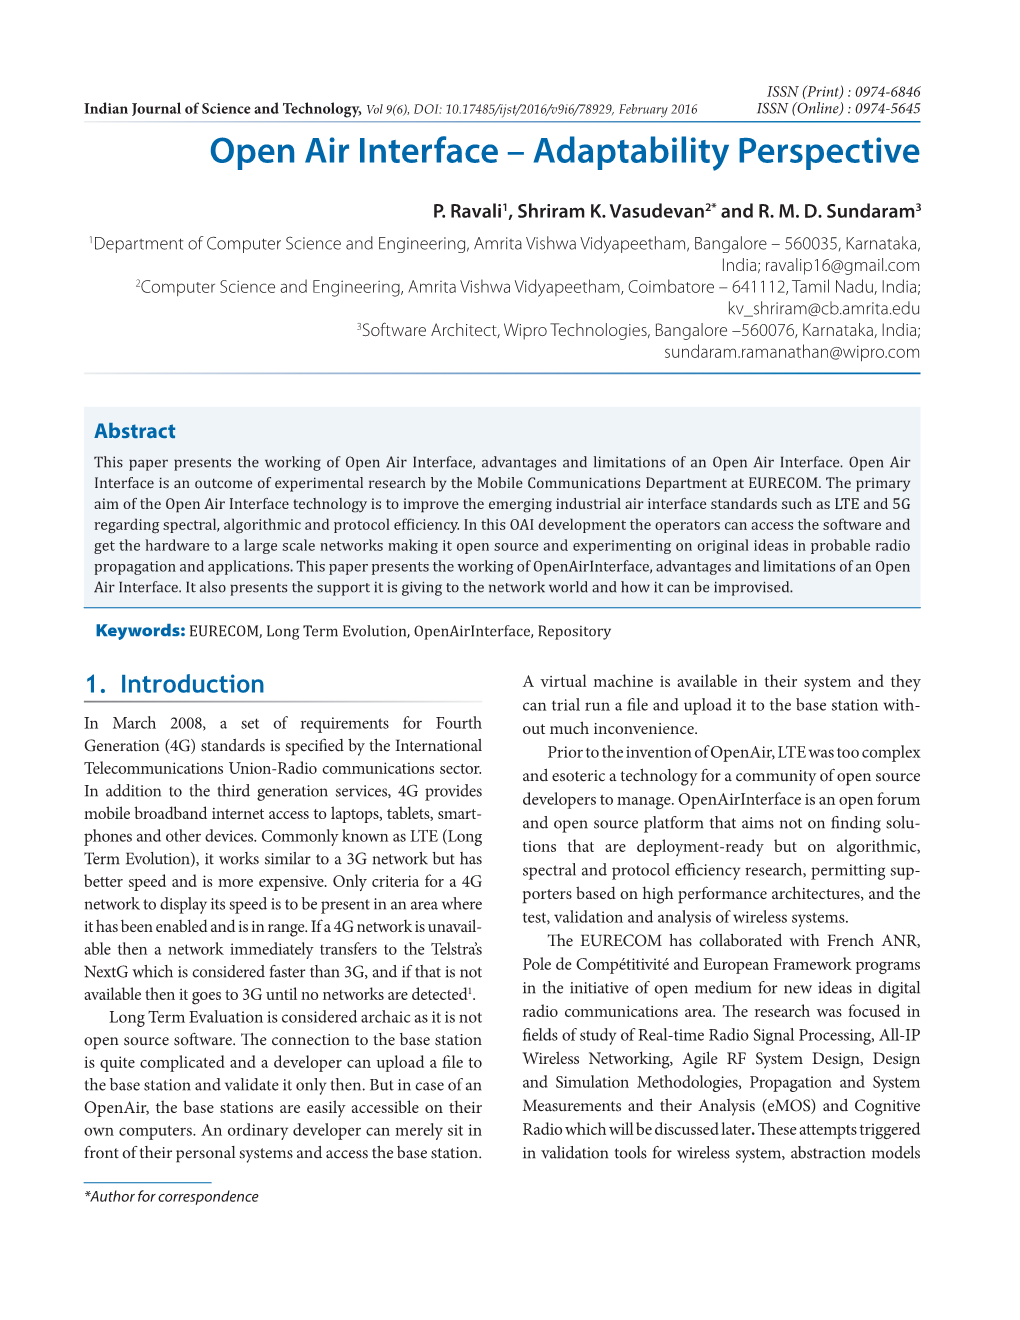 Open Air Interface – Adaptability Perspective